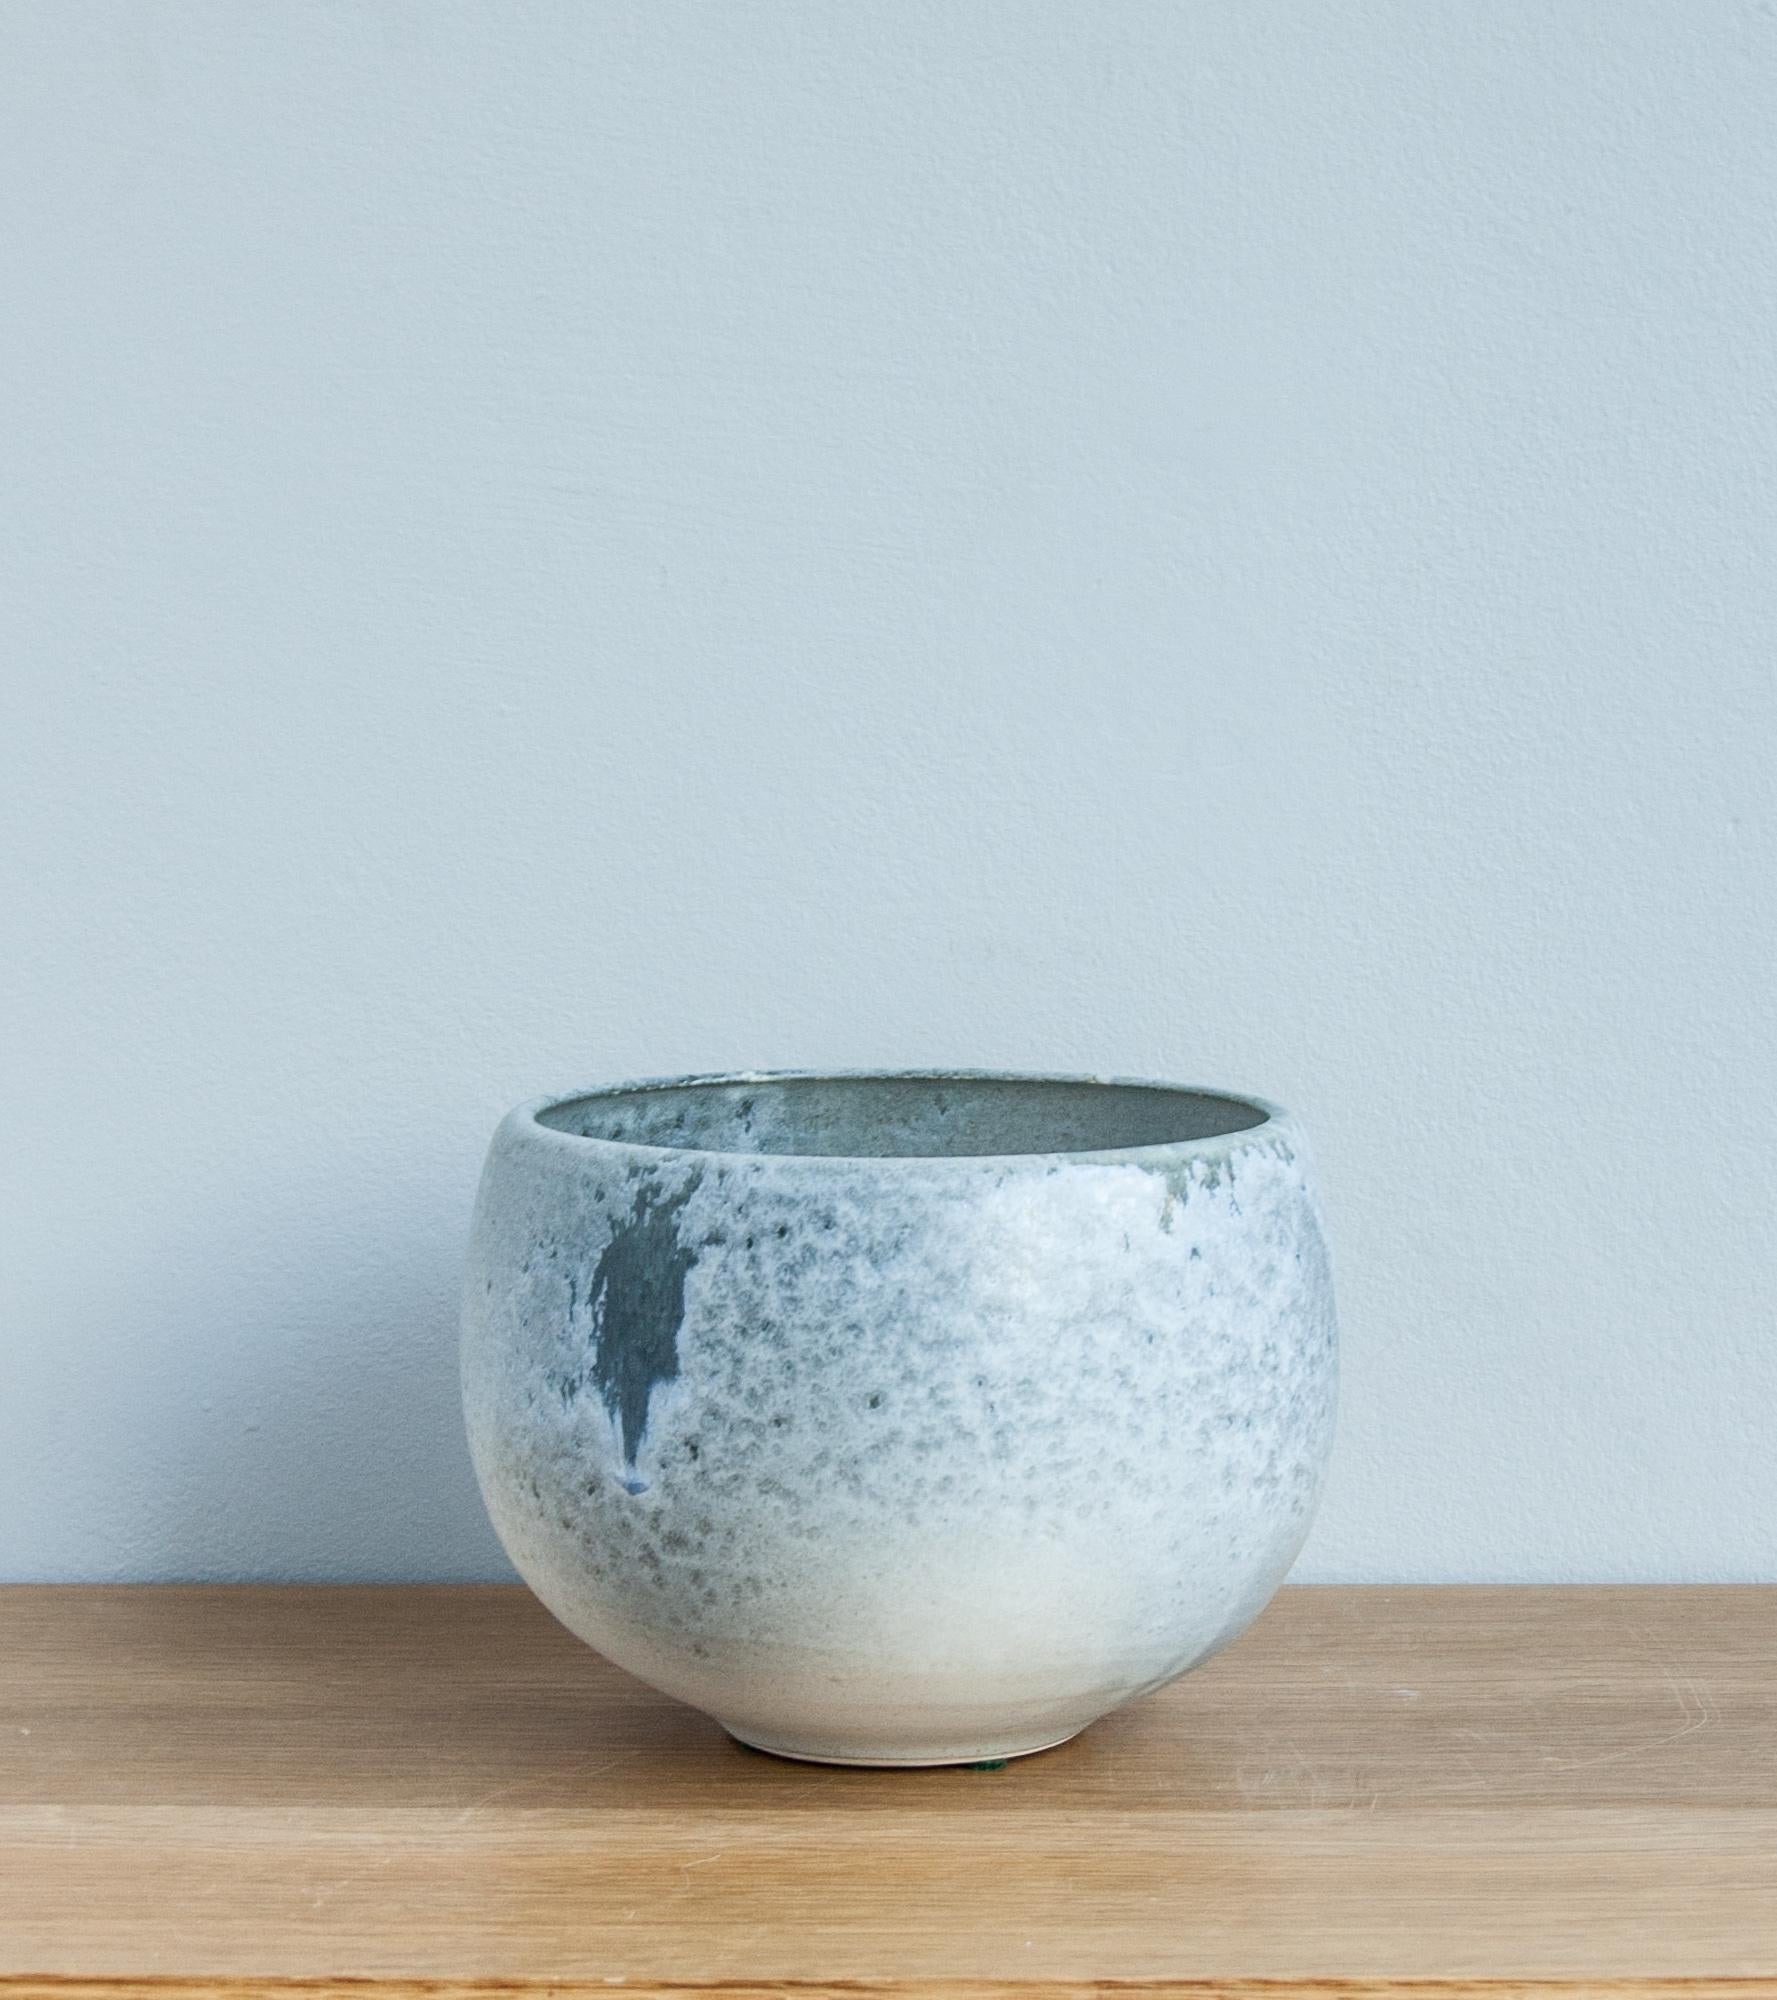 Aage and Kasper Würtz are a father and son team of studio ceramicists based near Horsens in eastern Jutland, Denmark. Known internationally for their hand-thrown and hand-glazed ceramics they have produced bespoke collections for distinguished fine